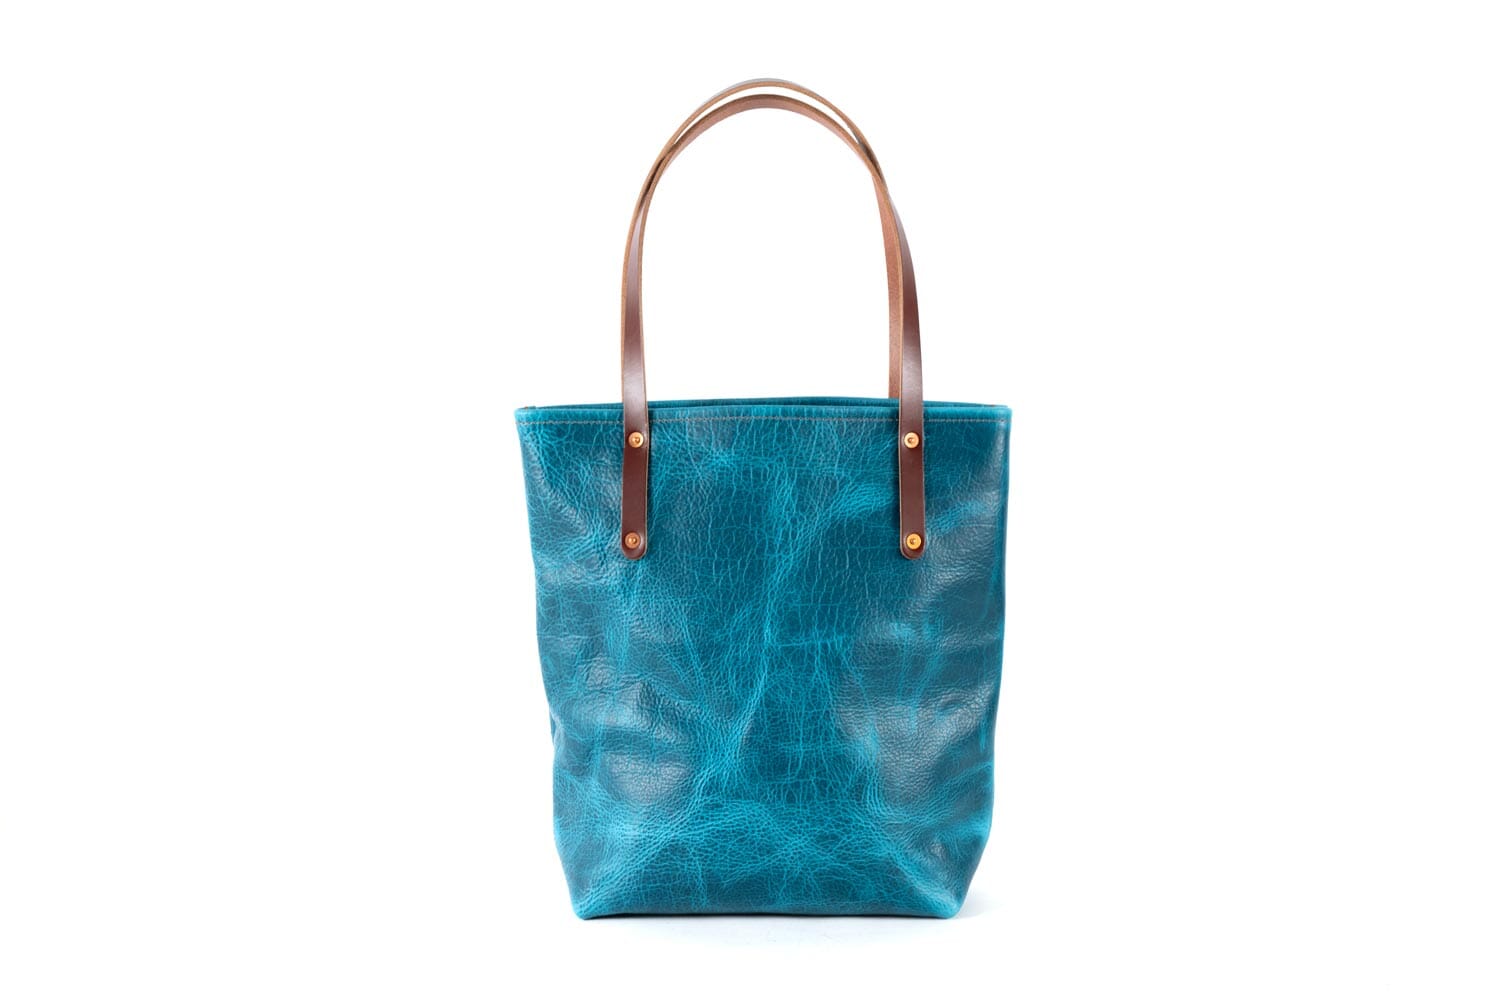 AVERY LEATHER TOTE BAG - SLIM LARGE - COBALT BISON (RTS)